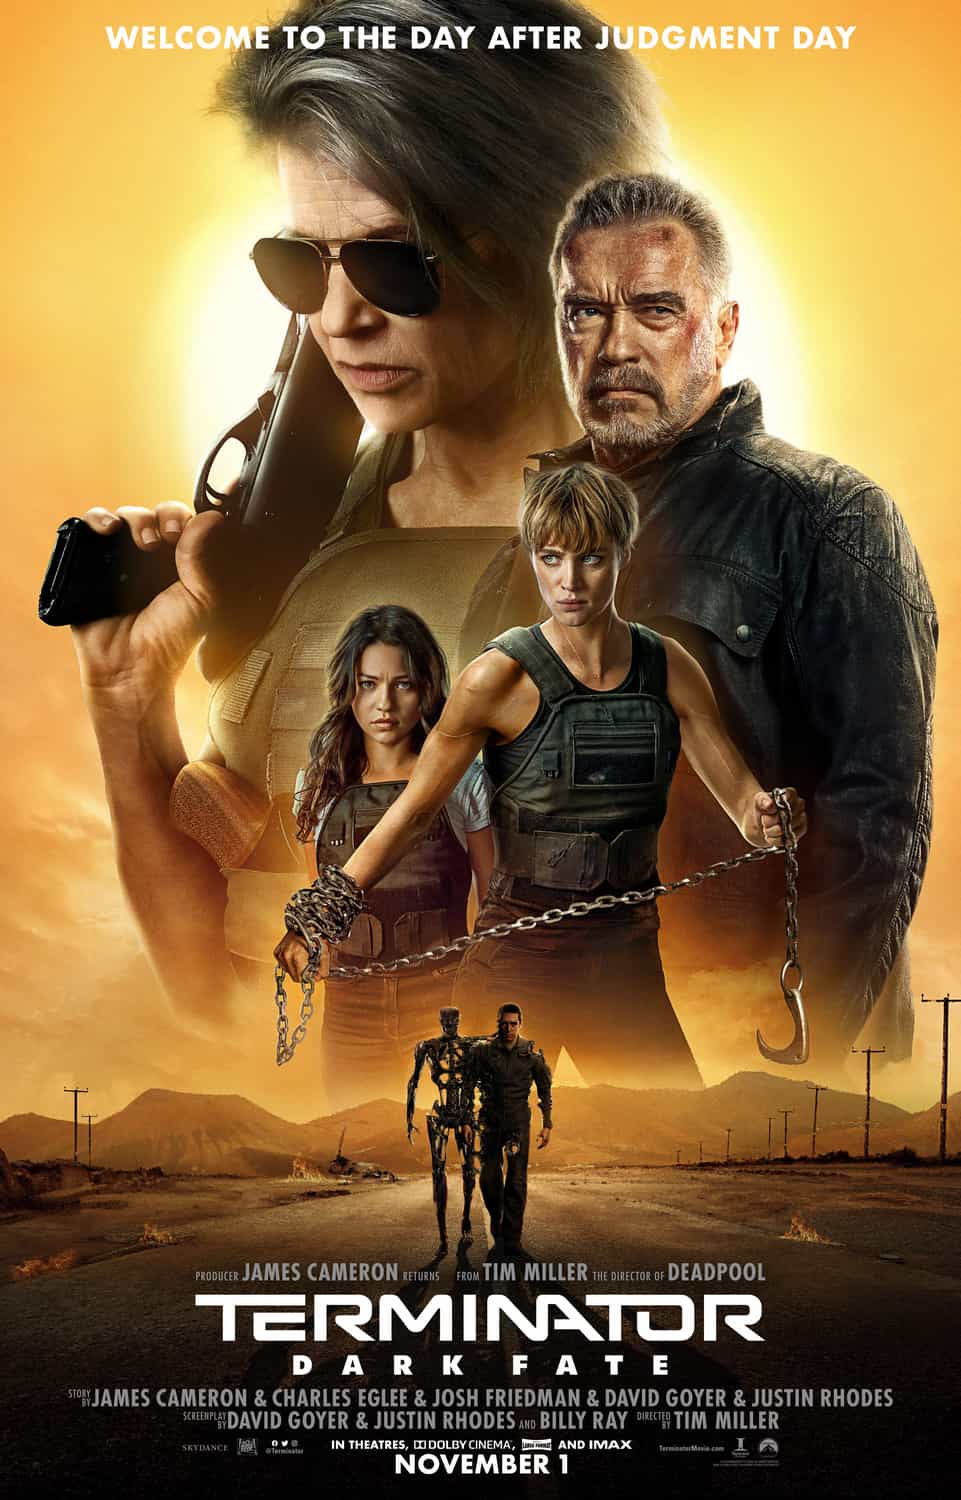 World Box Office Analysis 1st - 3rd November 2019:  Terminator: Dark Fate tops the global box office but its worrying for the franchise